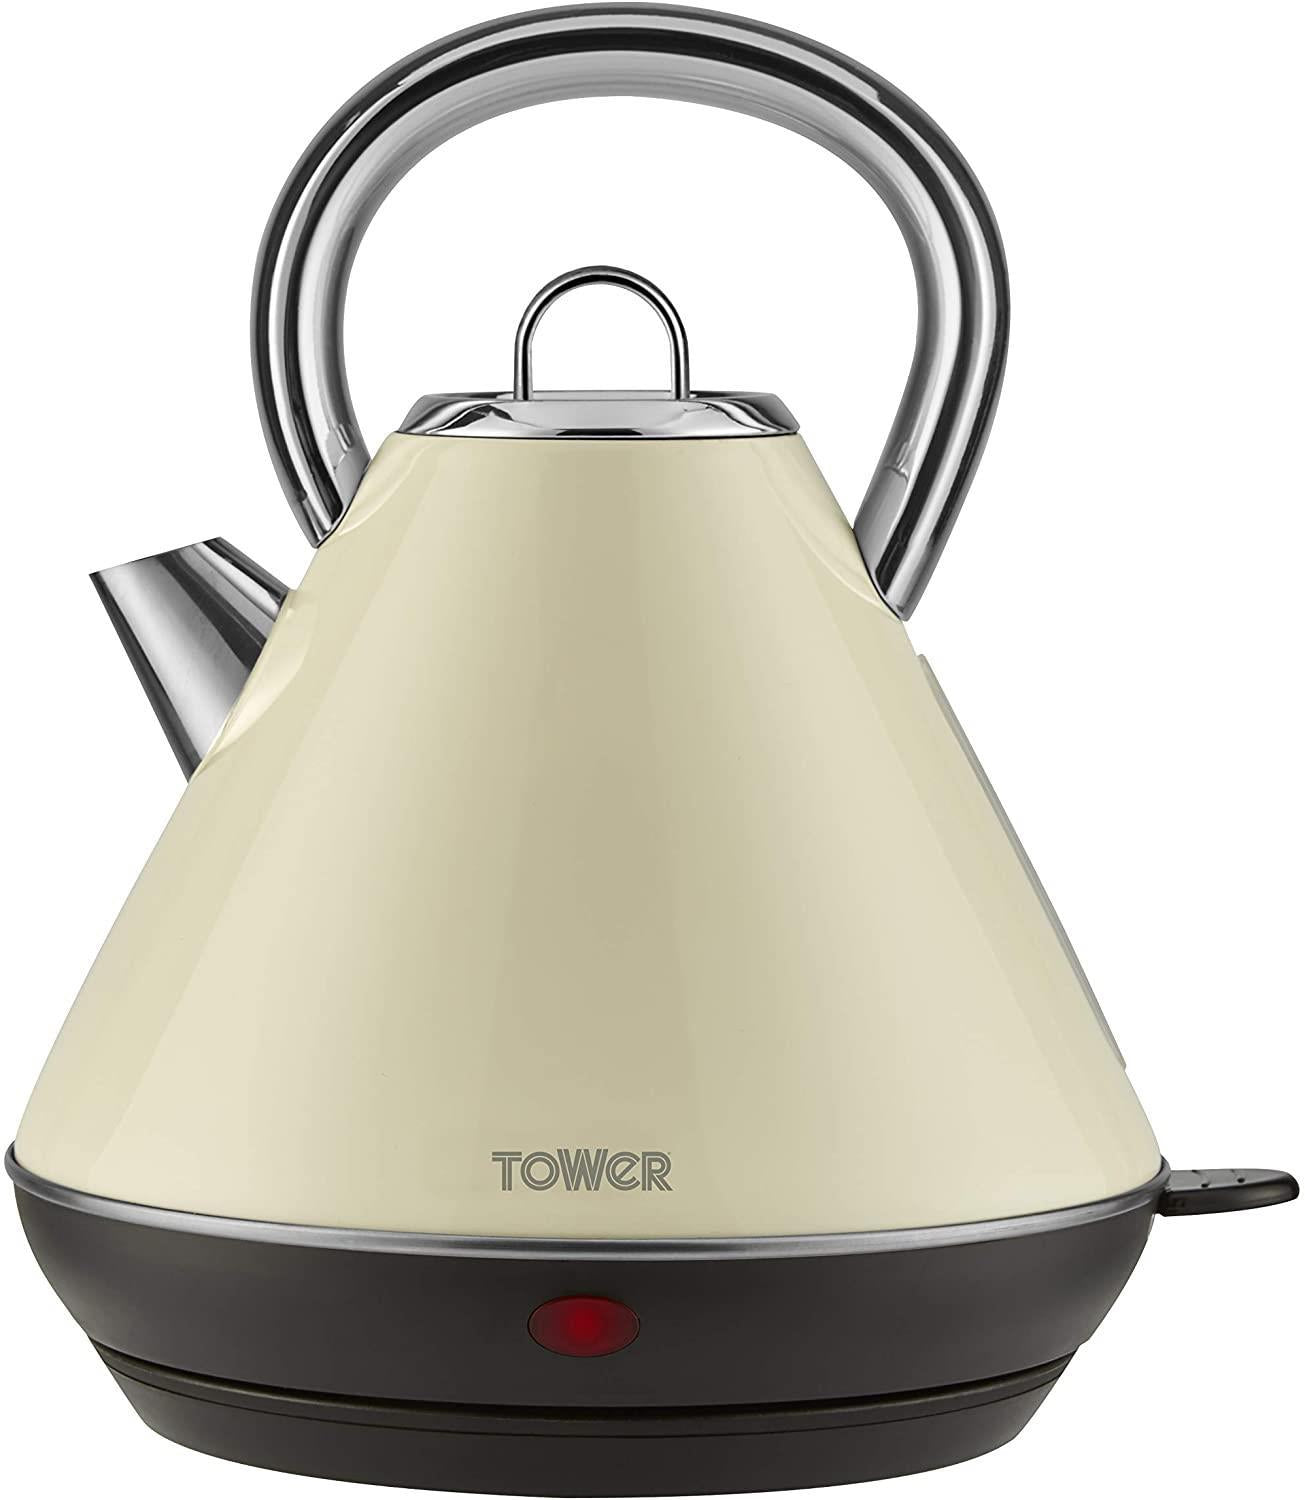 Tower Infinity Rapid Boil Traditional Kettle 3000w 1.8L Cream T10019C